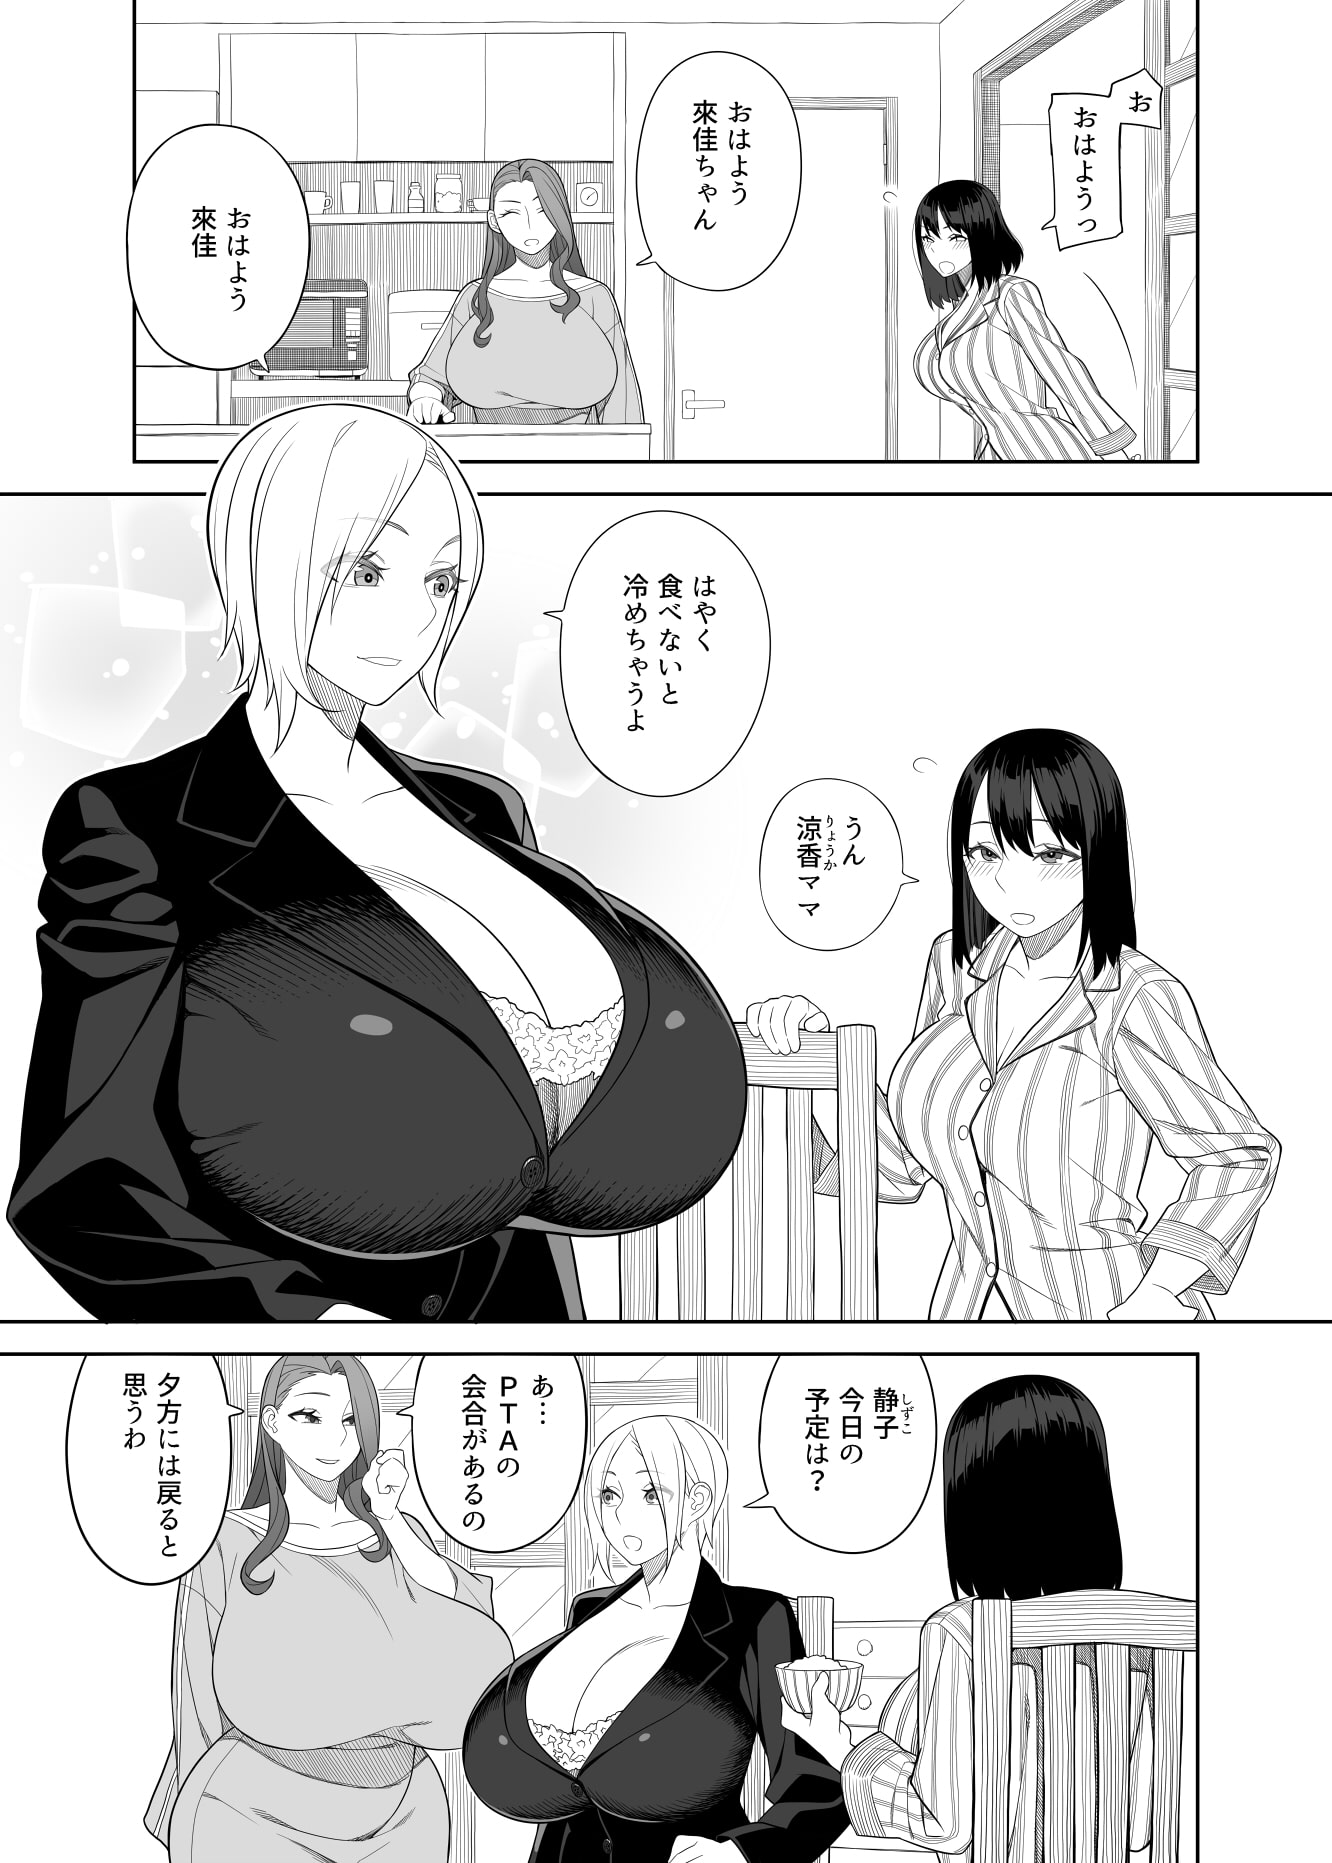 Busty Lewd Mother is the Principle's Woman 2